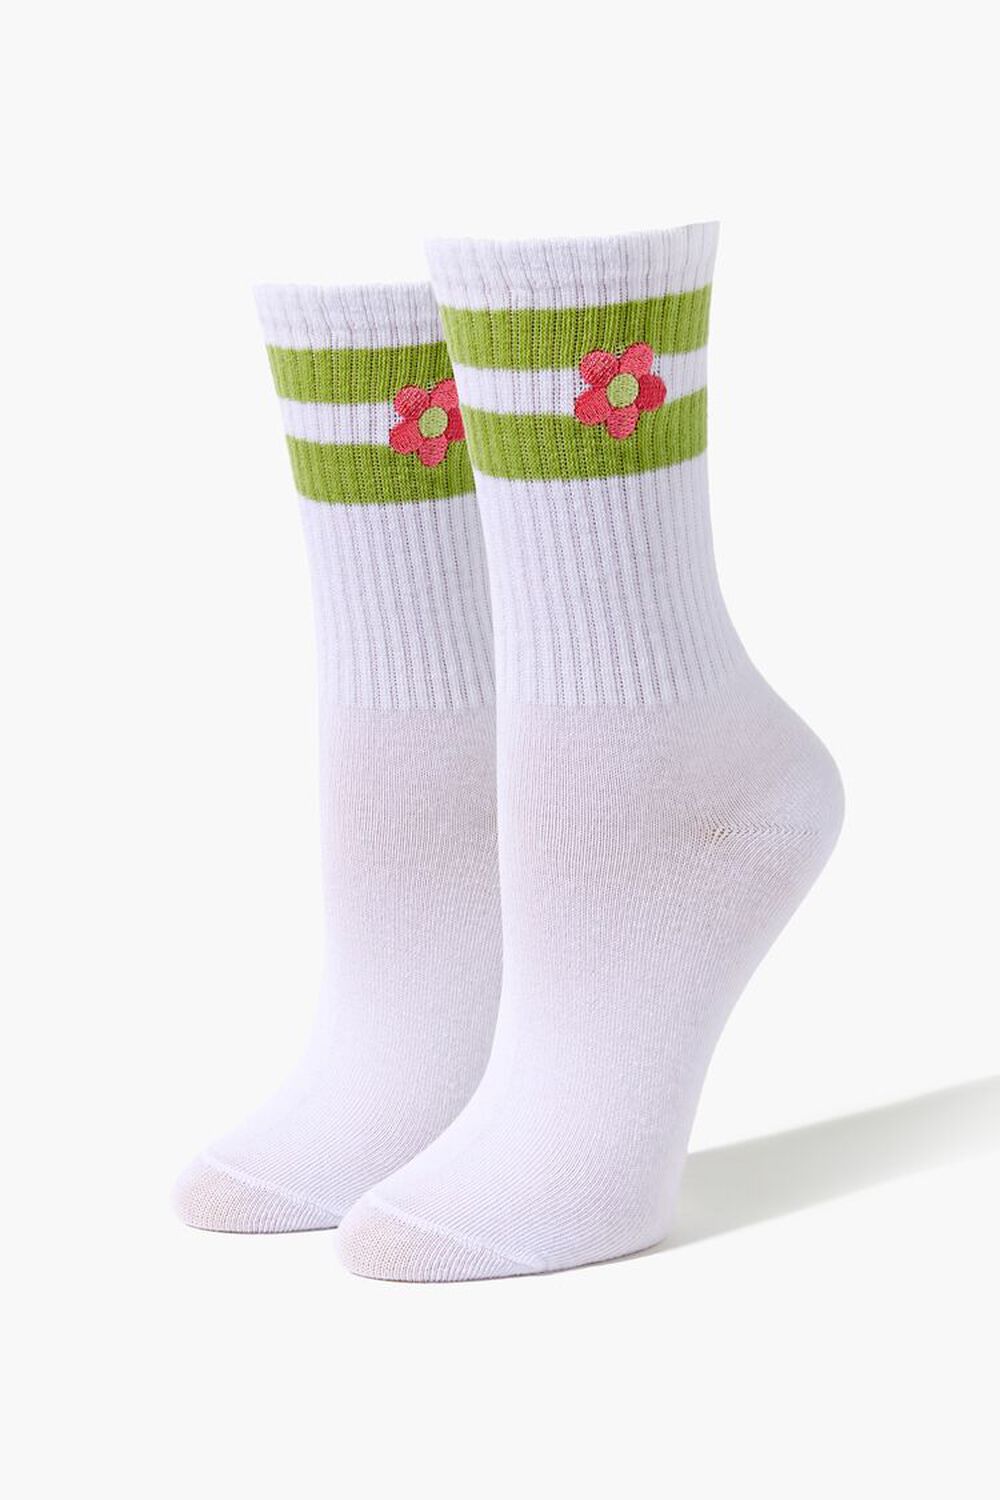 WHITE/GREEN Embroidered Floral Crew Socks, image 1